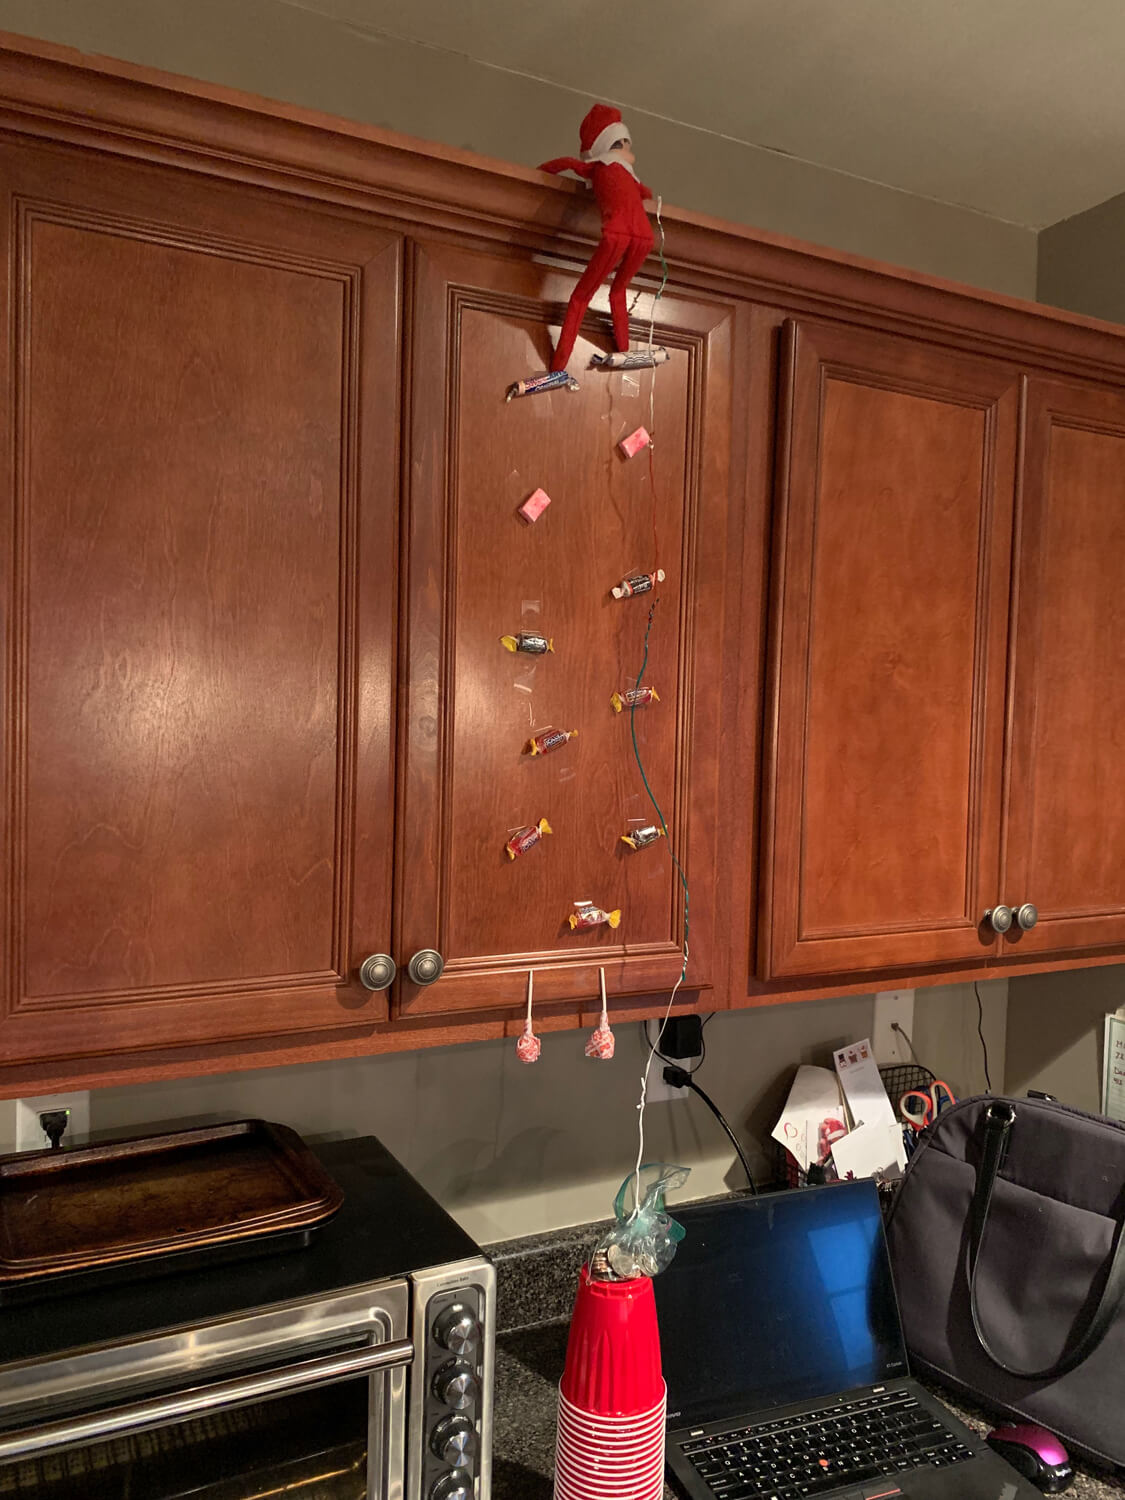 Use Your Smart Devices to Help Your Elf on the Shelf | Guardian ...